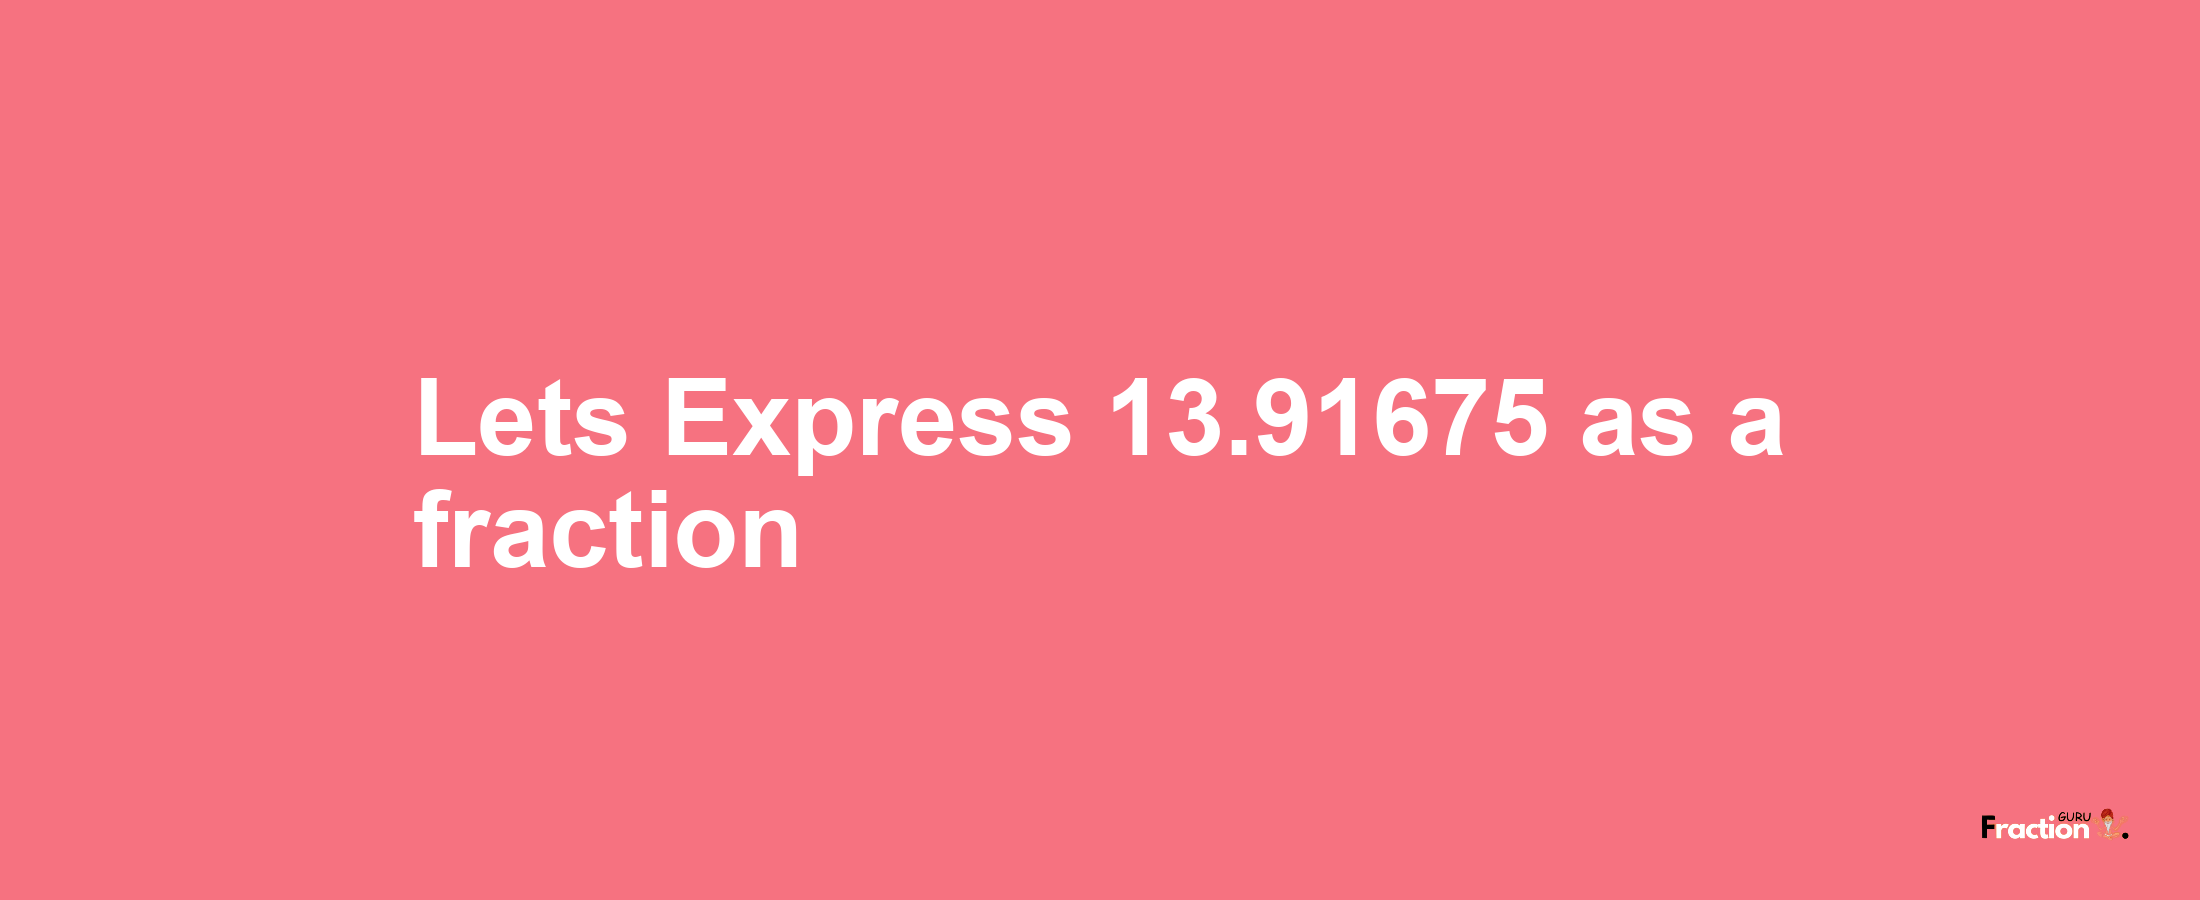 Lets Express 13.91675 as afraction